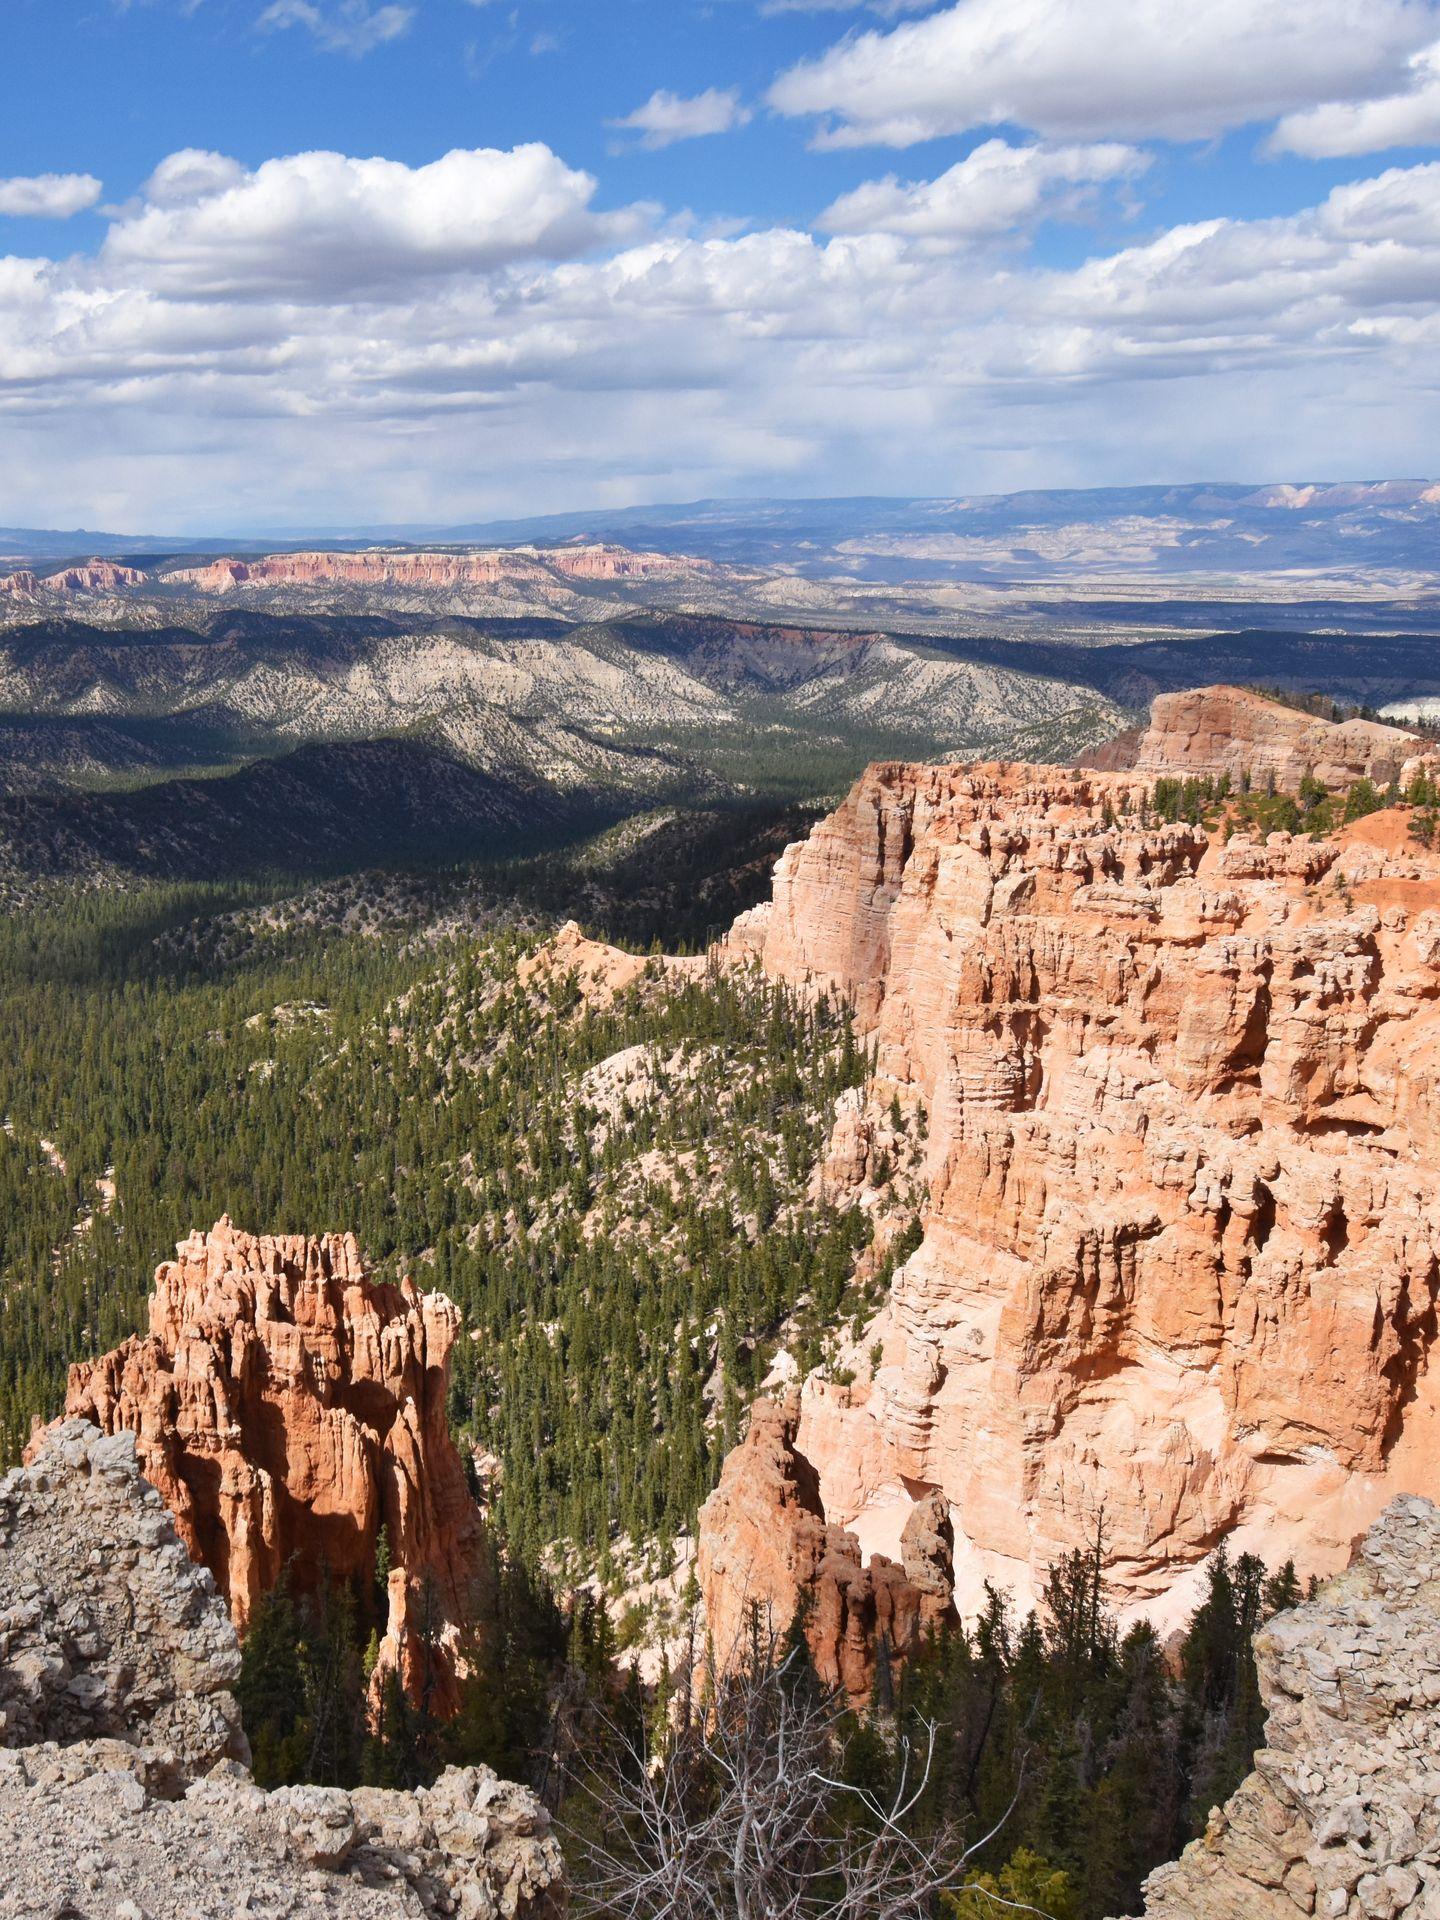 A view of some light orange colored hoodoos from Yovimpa Point. In the distance, there is a mix of green greens and various orange rock faces.